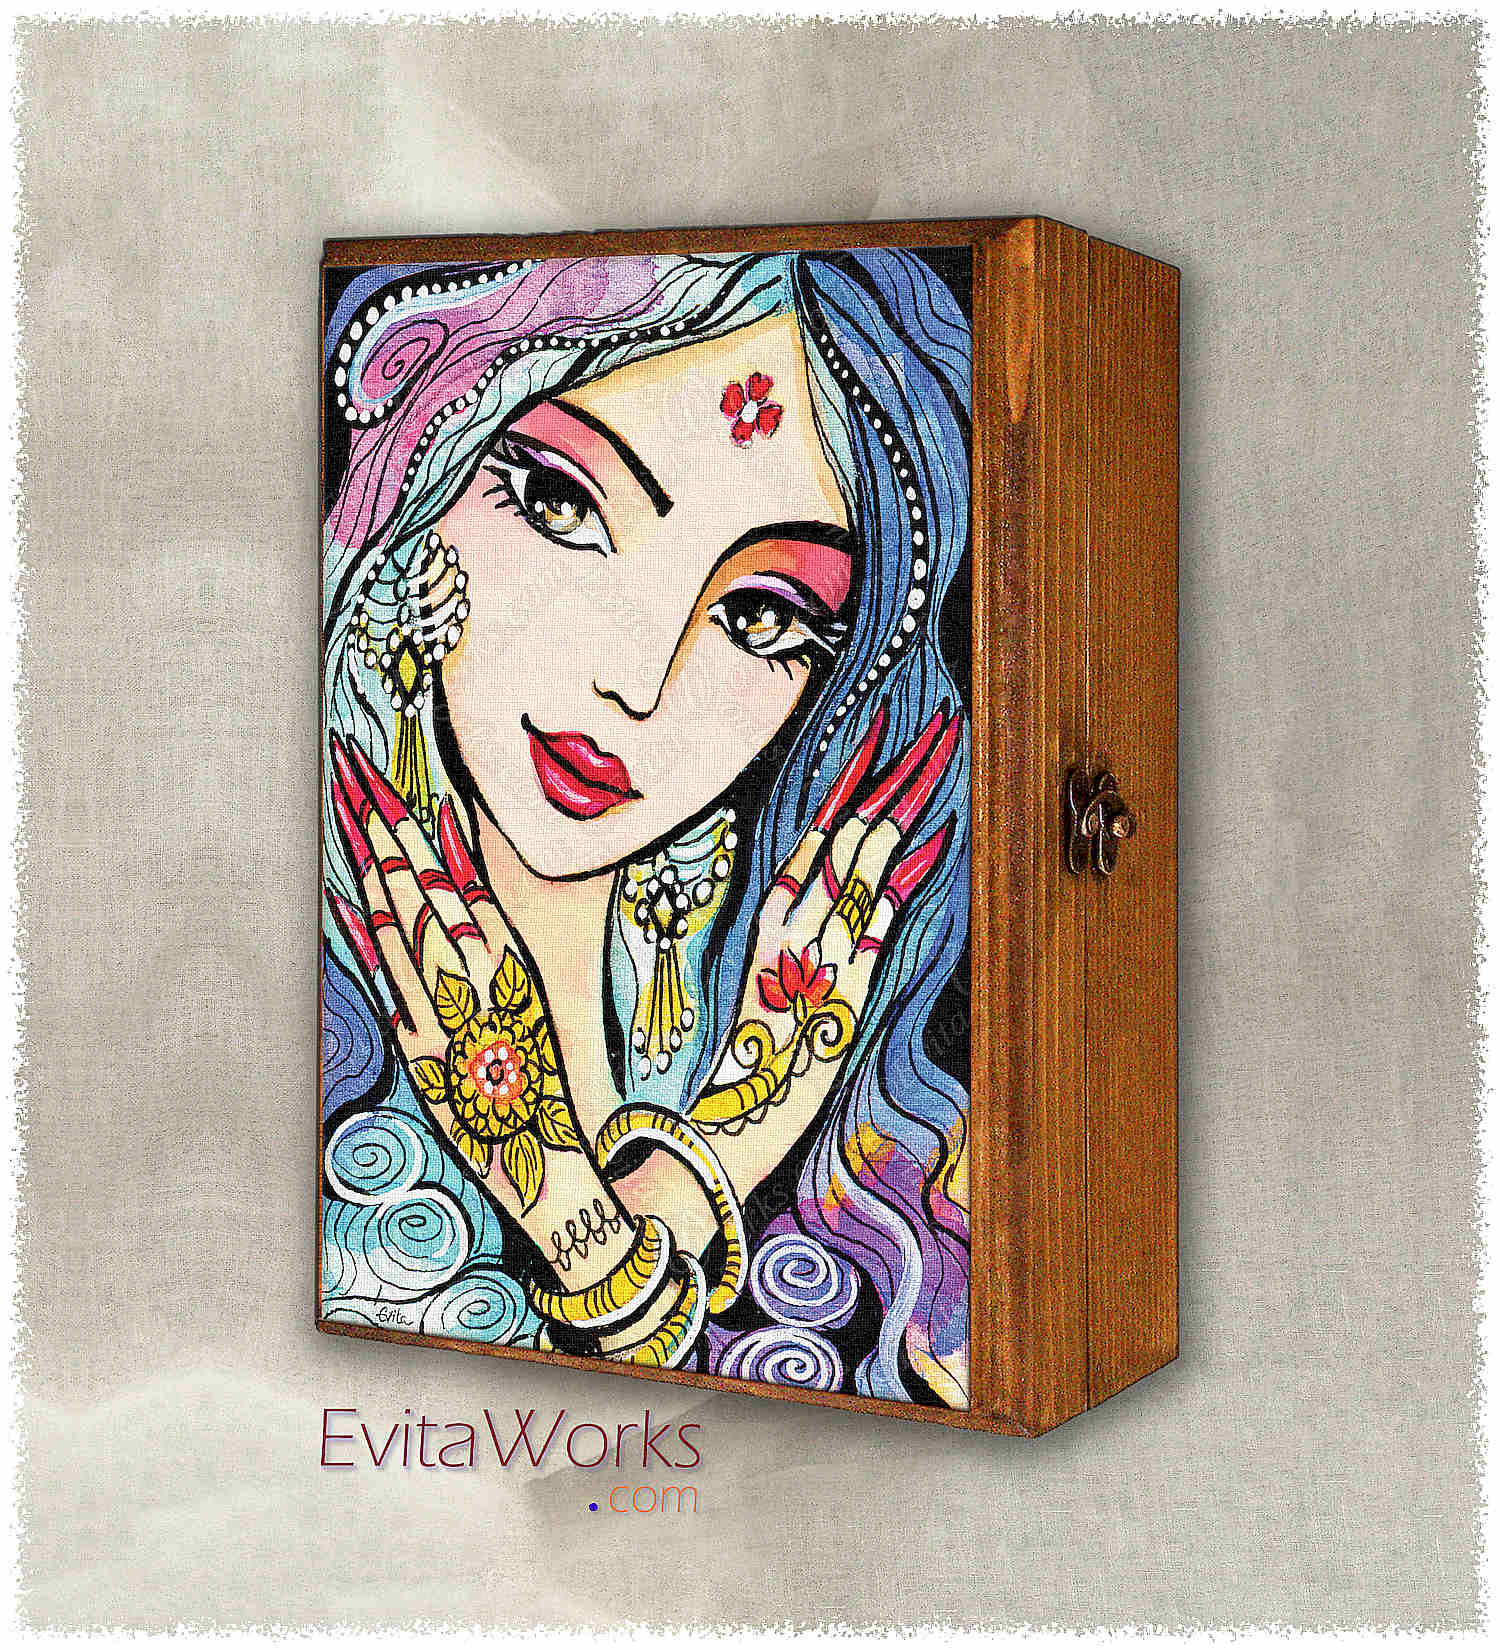 Hit to learn about "Hands of India, East woman art" on jewelboxes